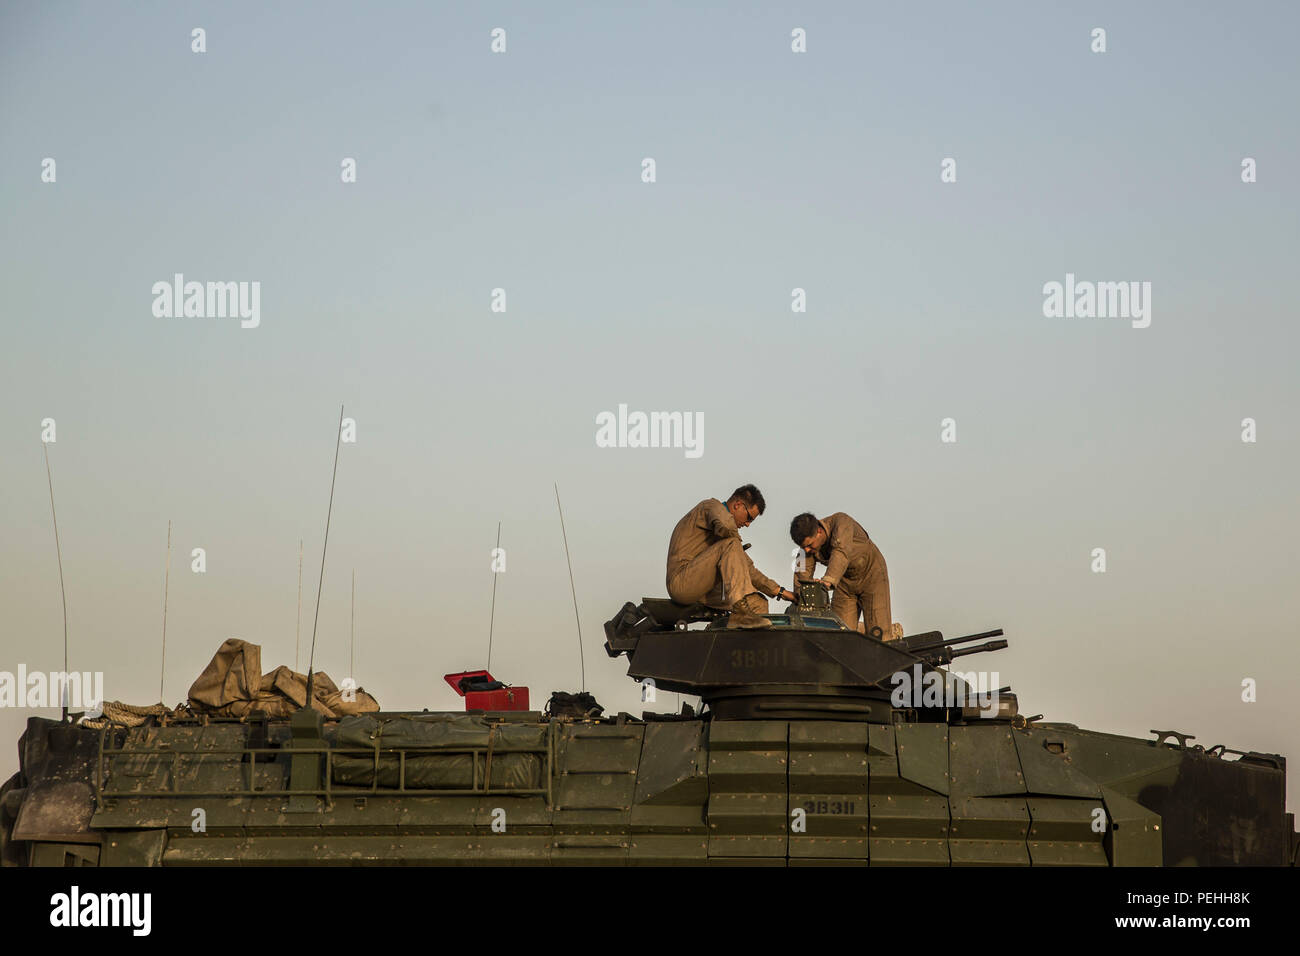 KUWAIT (Aug. 18, 2015) U.S. Marine Lance Cpl. Anthony Gomez (left) and Cpl. Christopher Jimerson perform routine maintenance on an Amphibious Assault Vehicle (AAV-7) before a live-fire and maneuver exercise. Gomez and Jimerson are both crewmen with Kilo Company, Battalion Landing Team 3rd Battalion, 1st Marine Regiment, 15th Marine Expeditionary Unit (MEU). During the training, Marines engaged targets with the Browning .50 caliber machine gun at unknown distances from AAV-7. Elements of the 15th MEU are ashore in Kuwait for sustainment training to maintain and enhance the skills they developed Stock Photo